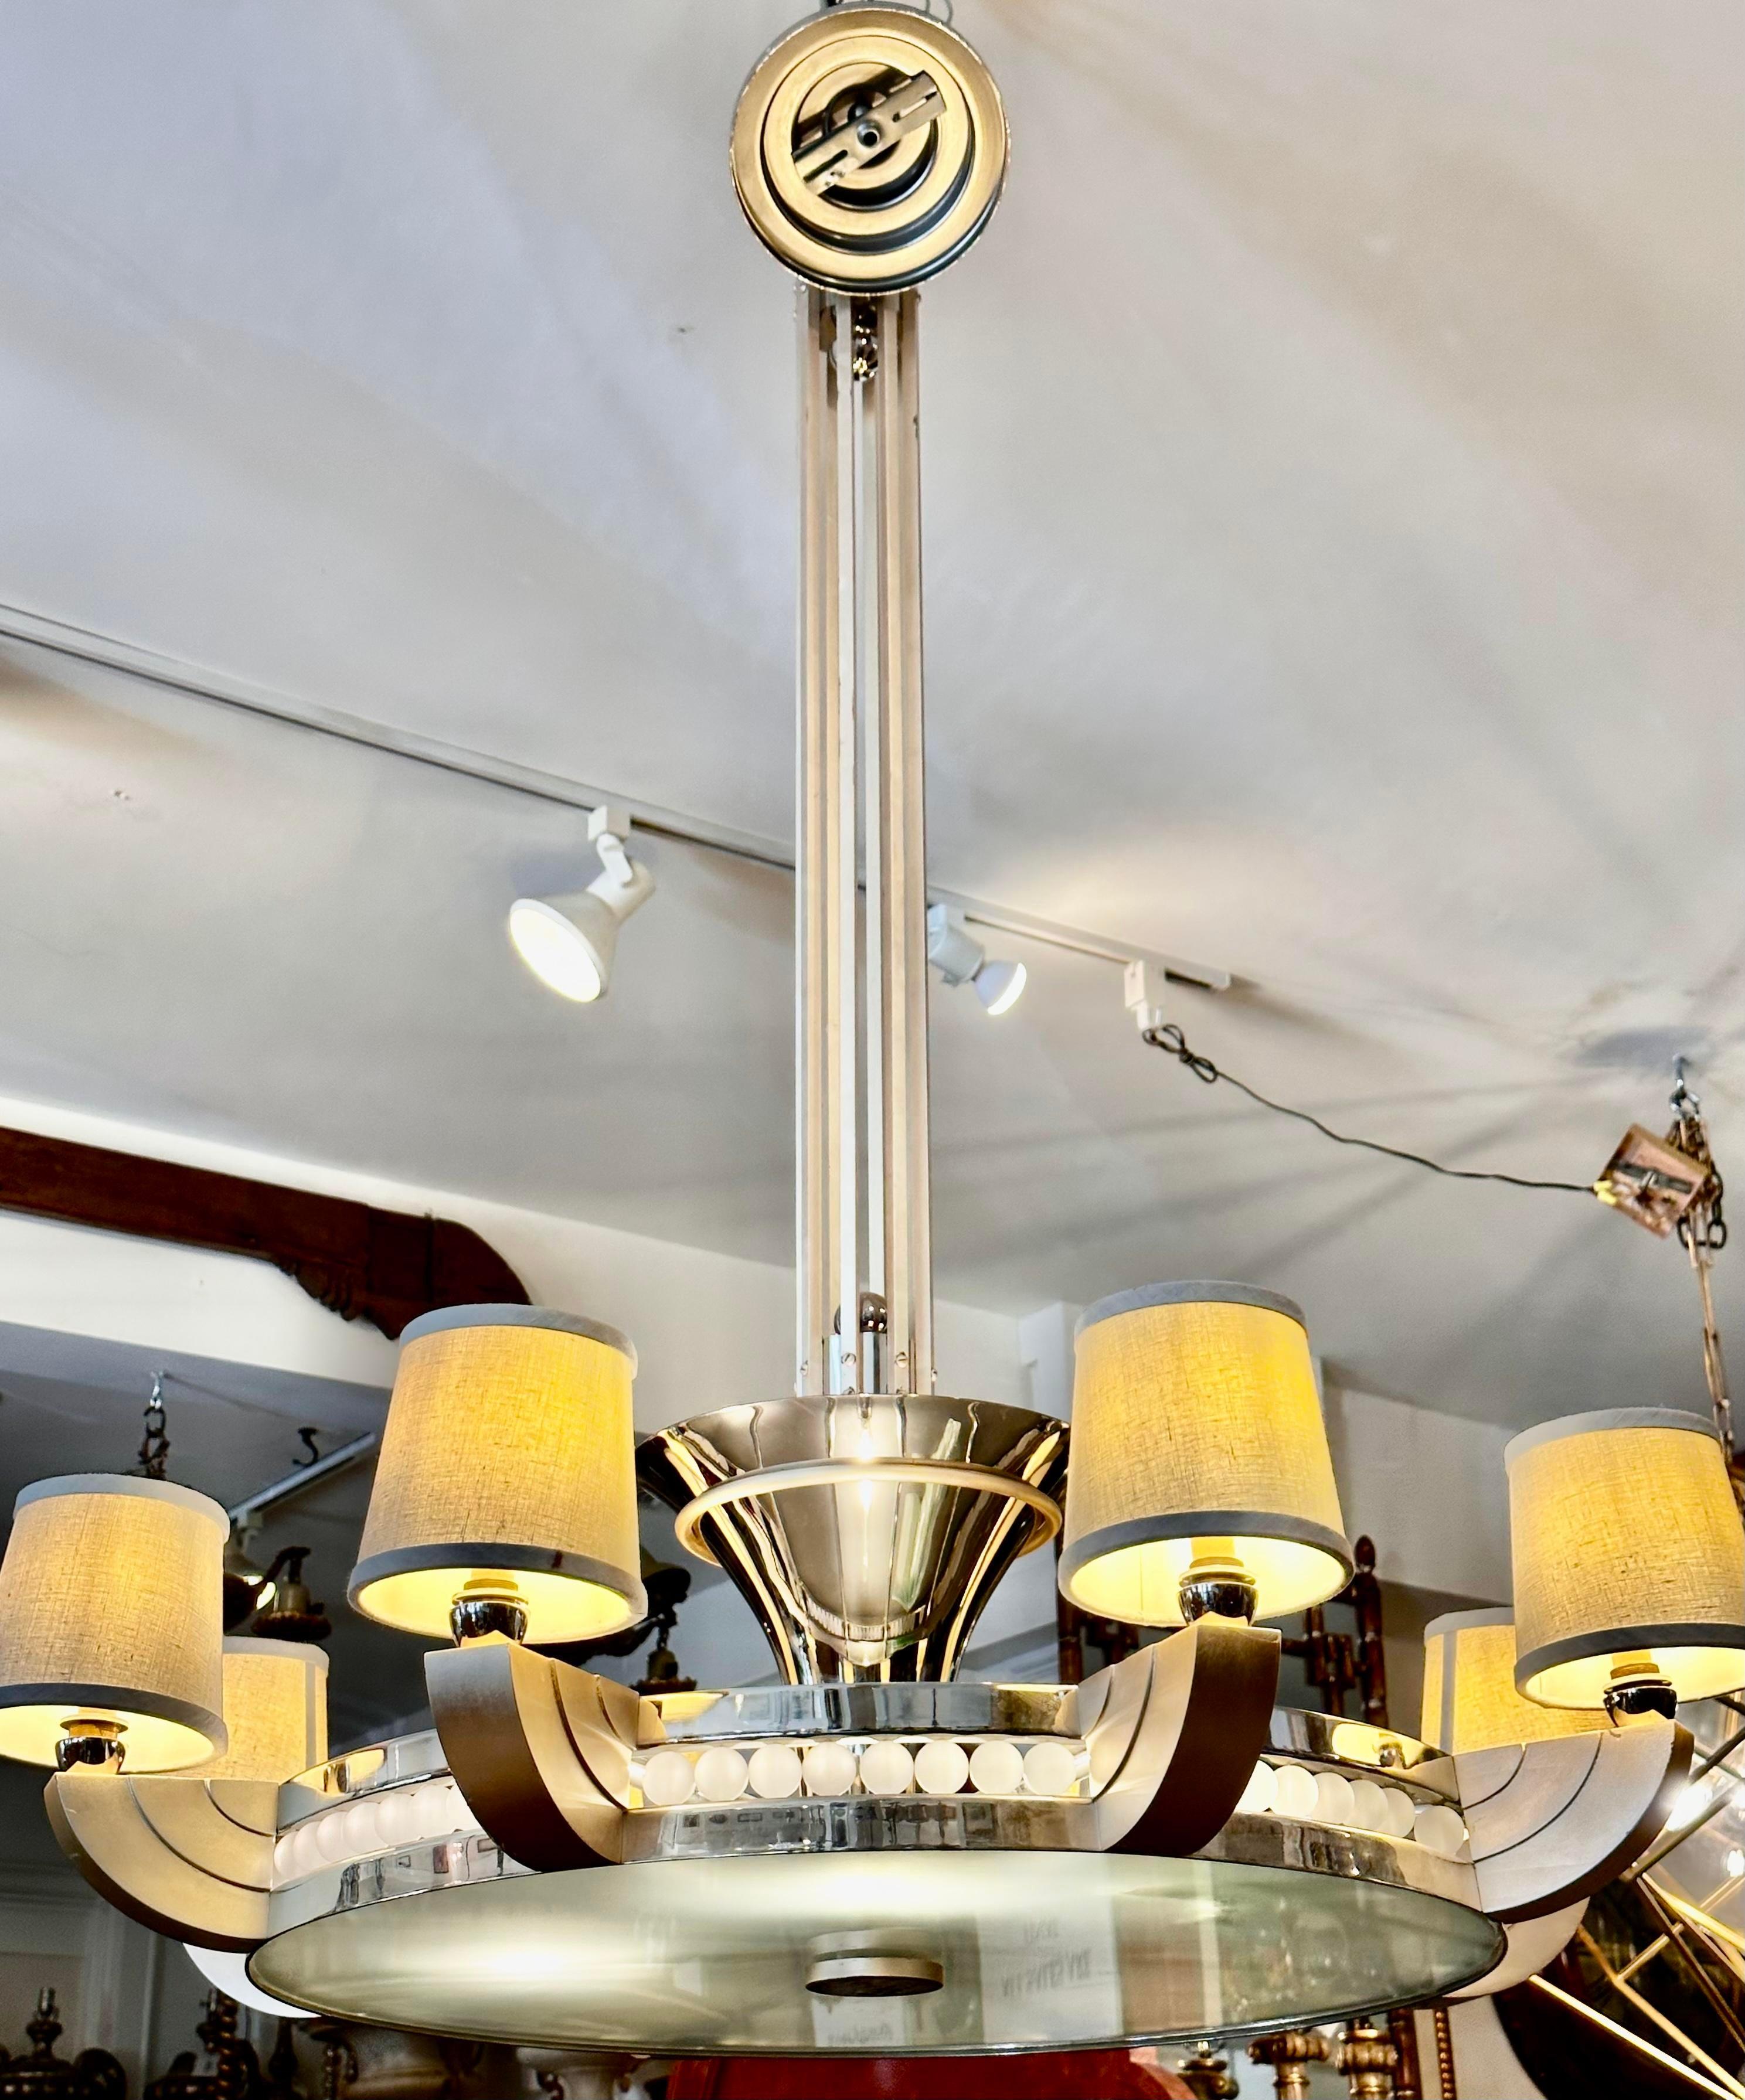 Huge Art Deco Sally Sirkin Lewis for J Robert Scott Odette Chandelier. It is the larger example with linen shades.